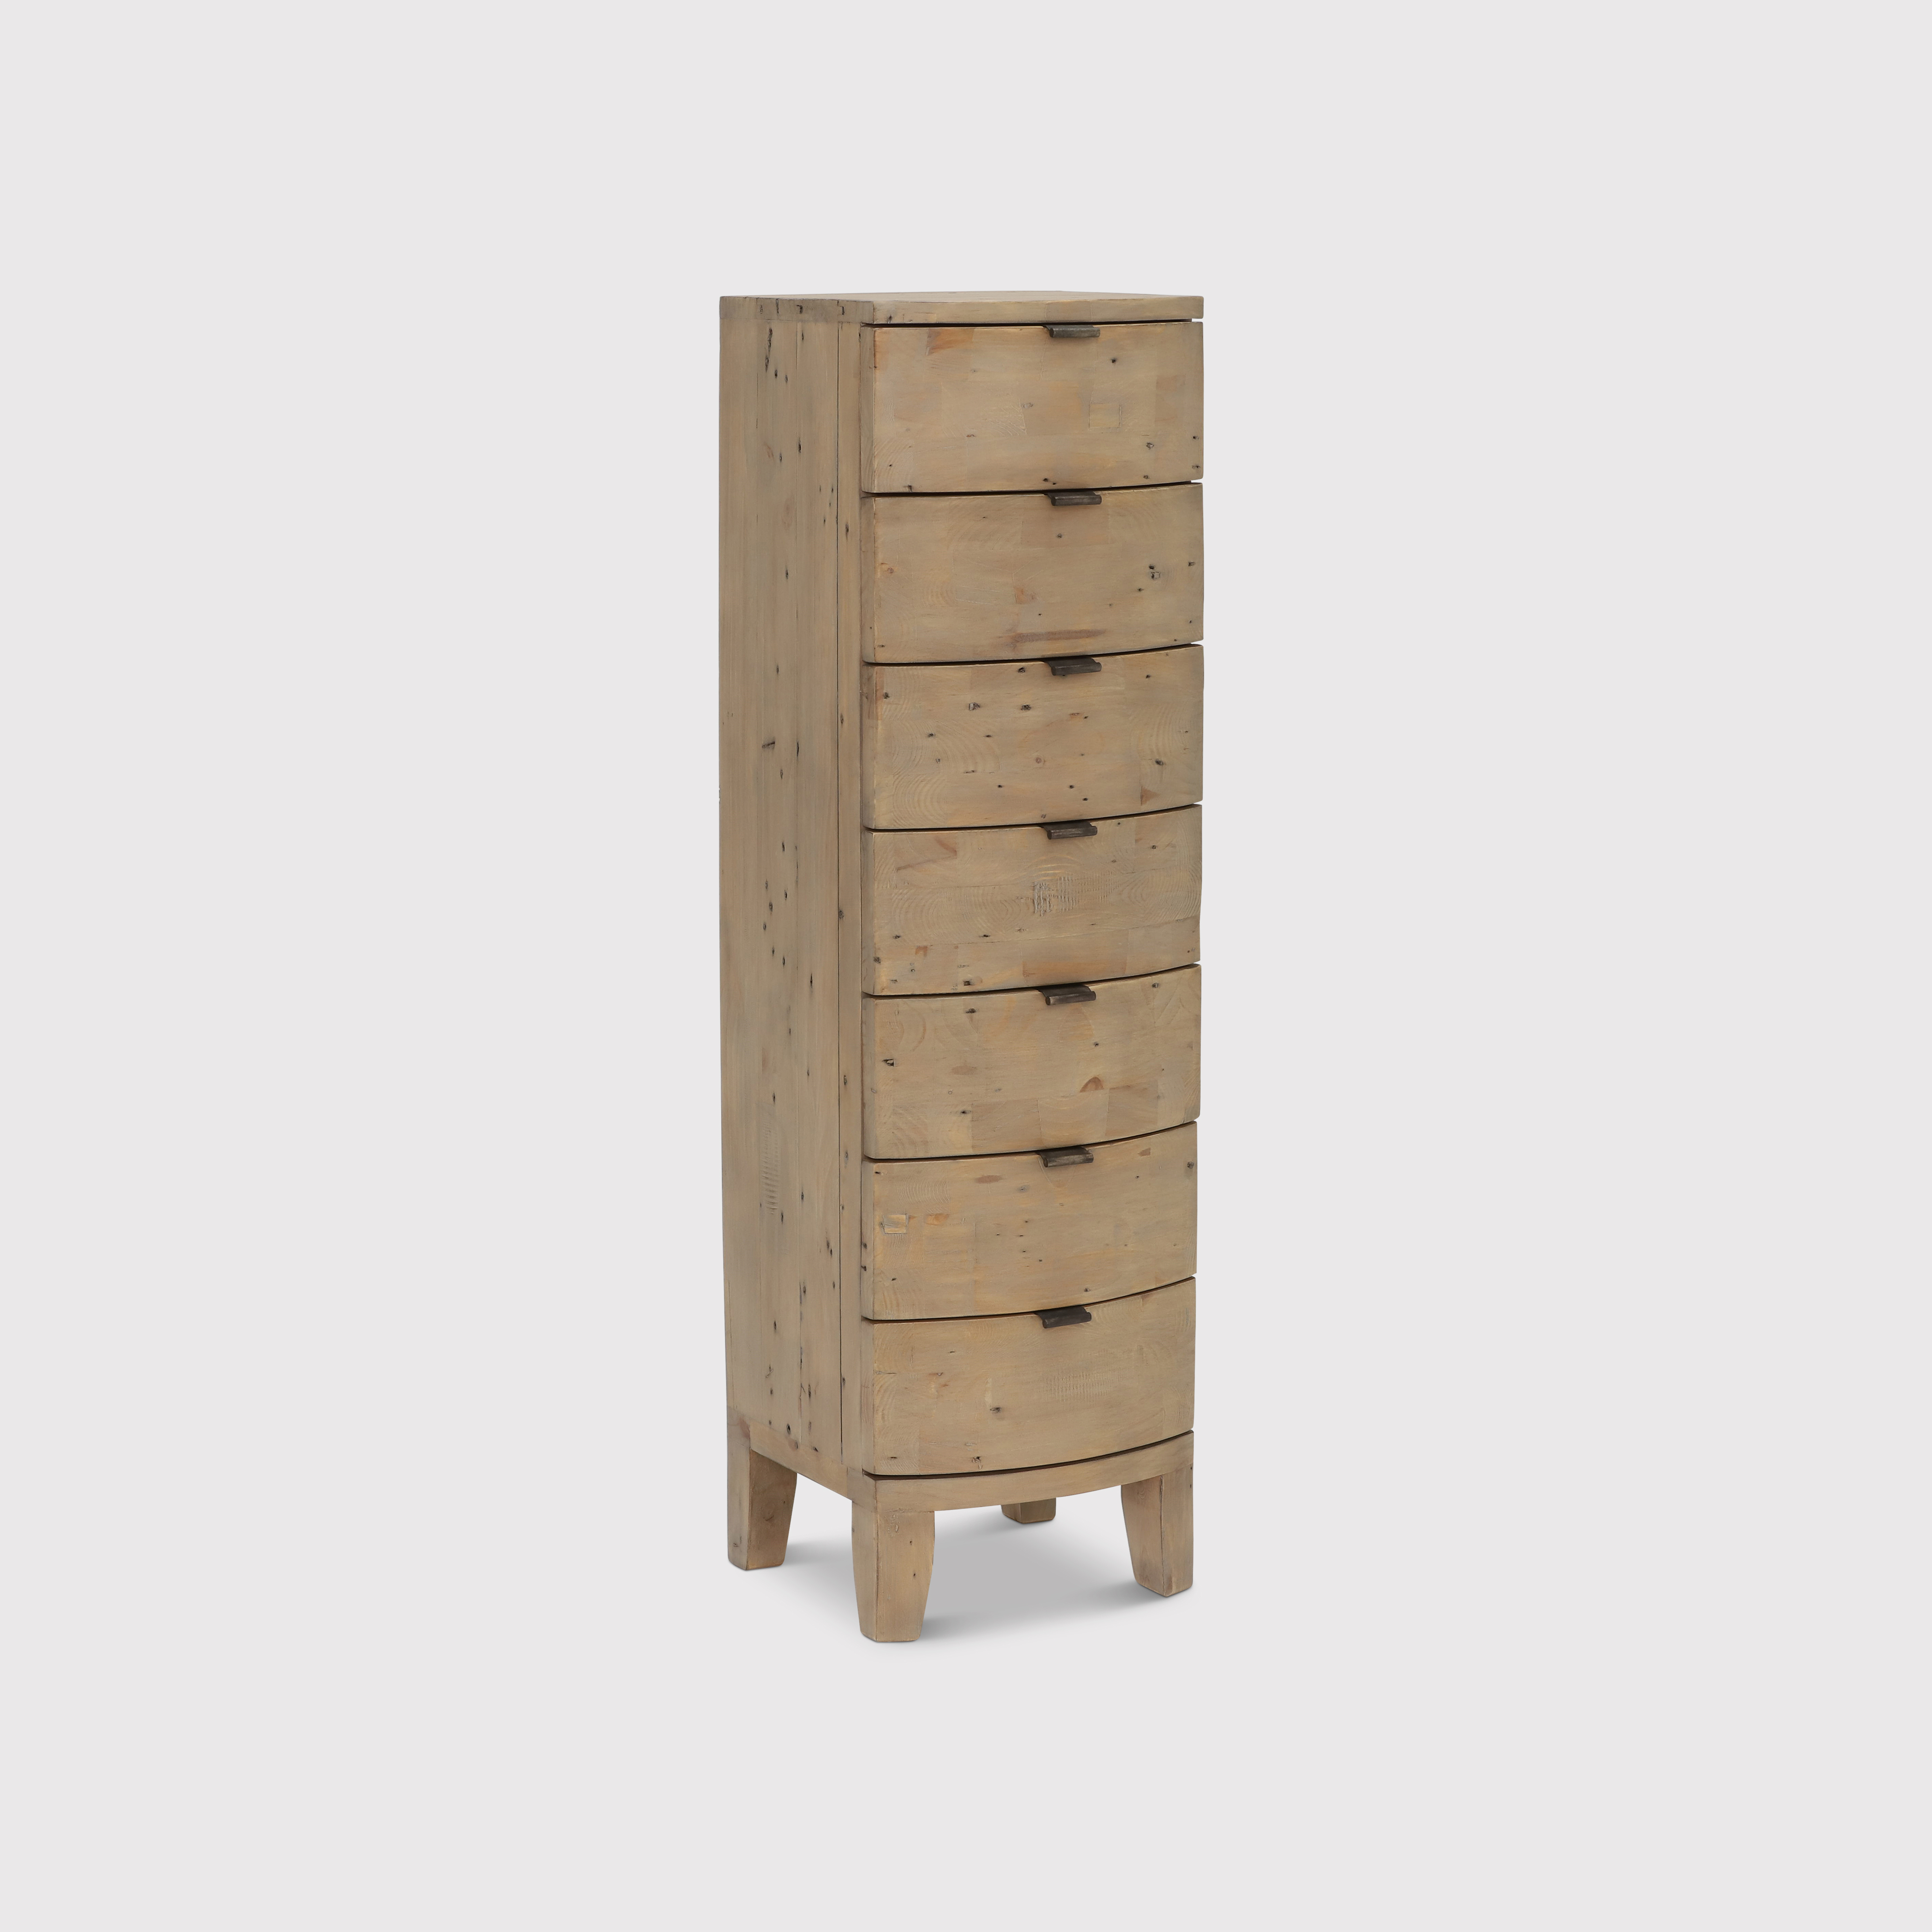 Rye 7 Drawer Tall Chest, Brown | Barker & Stonehouse